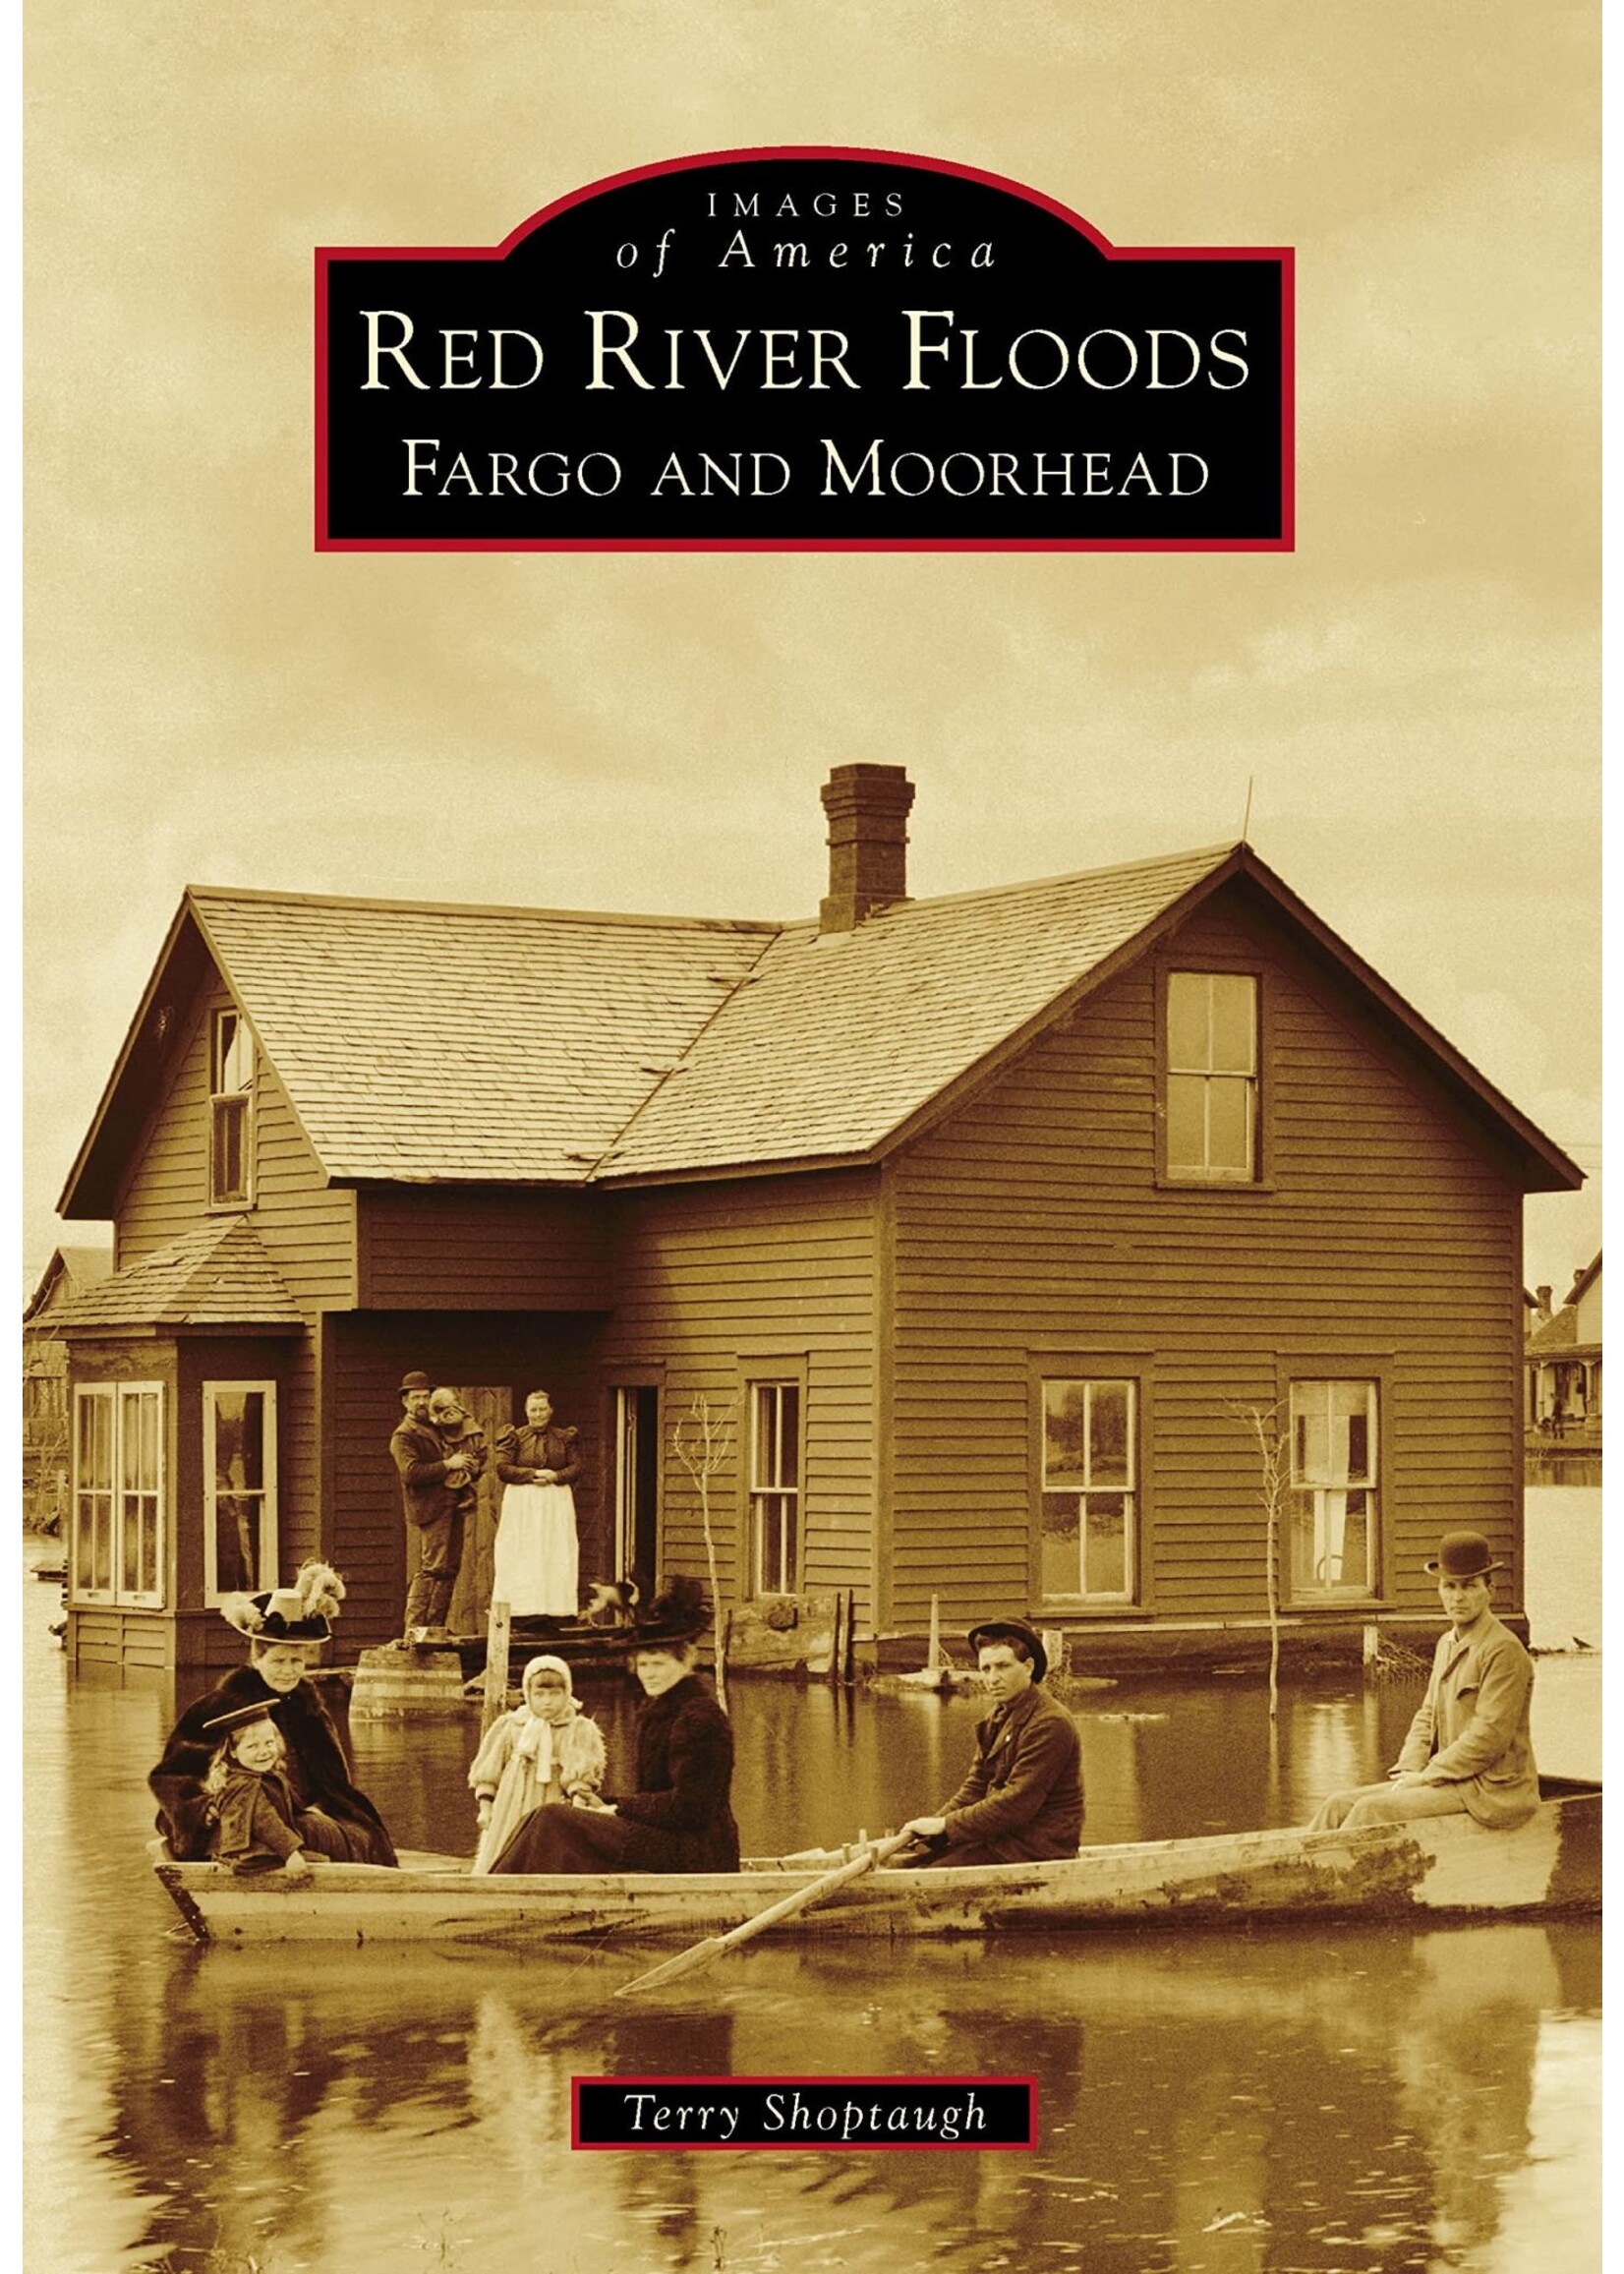 Red River Floods: Fargo and Moorhead: Images of America